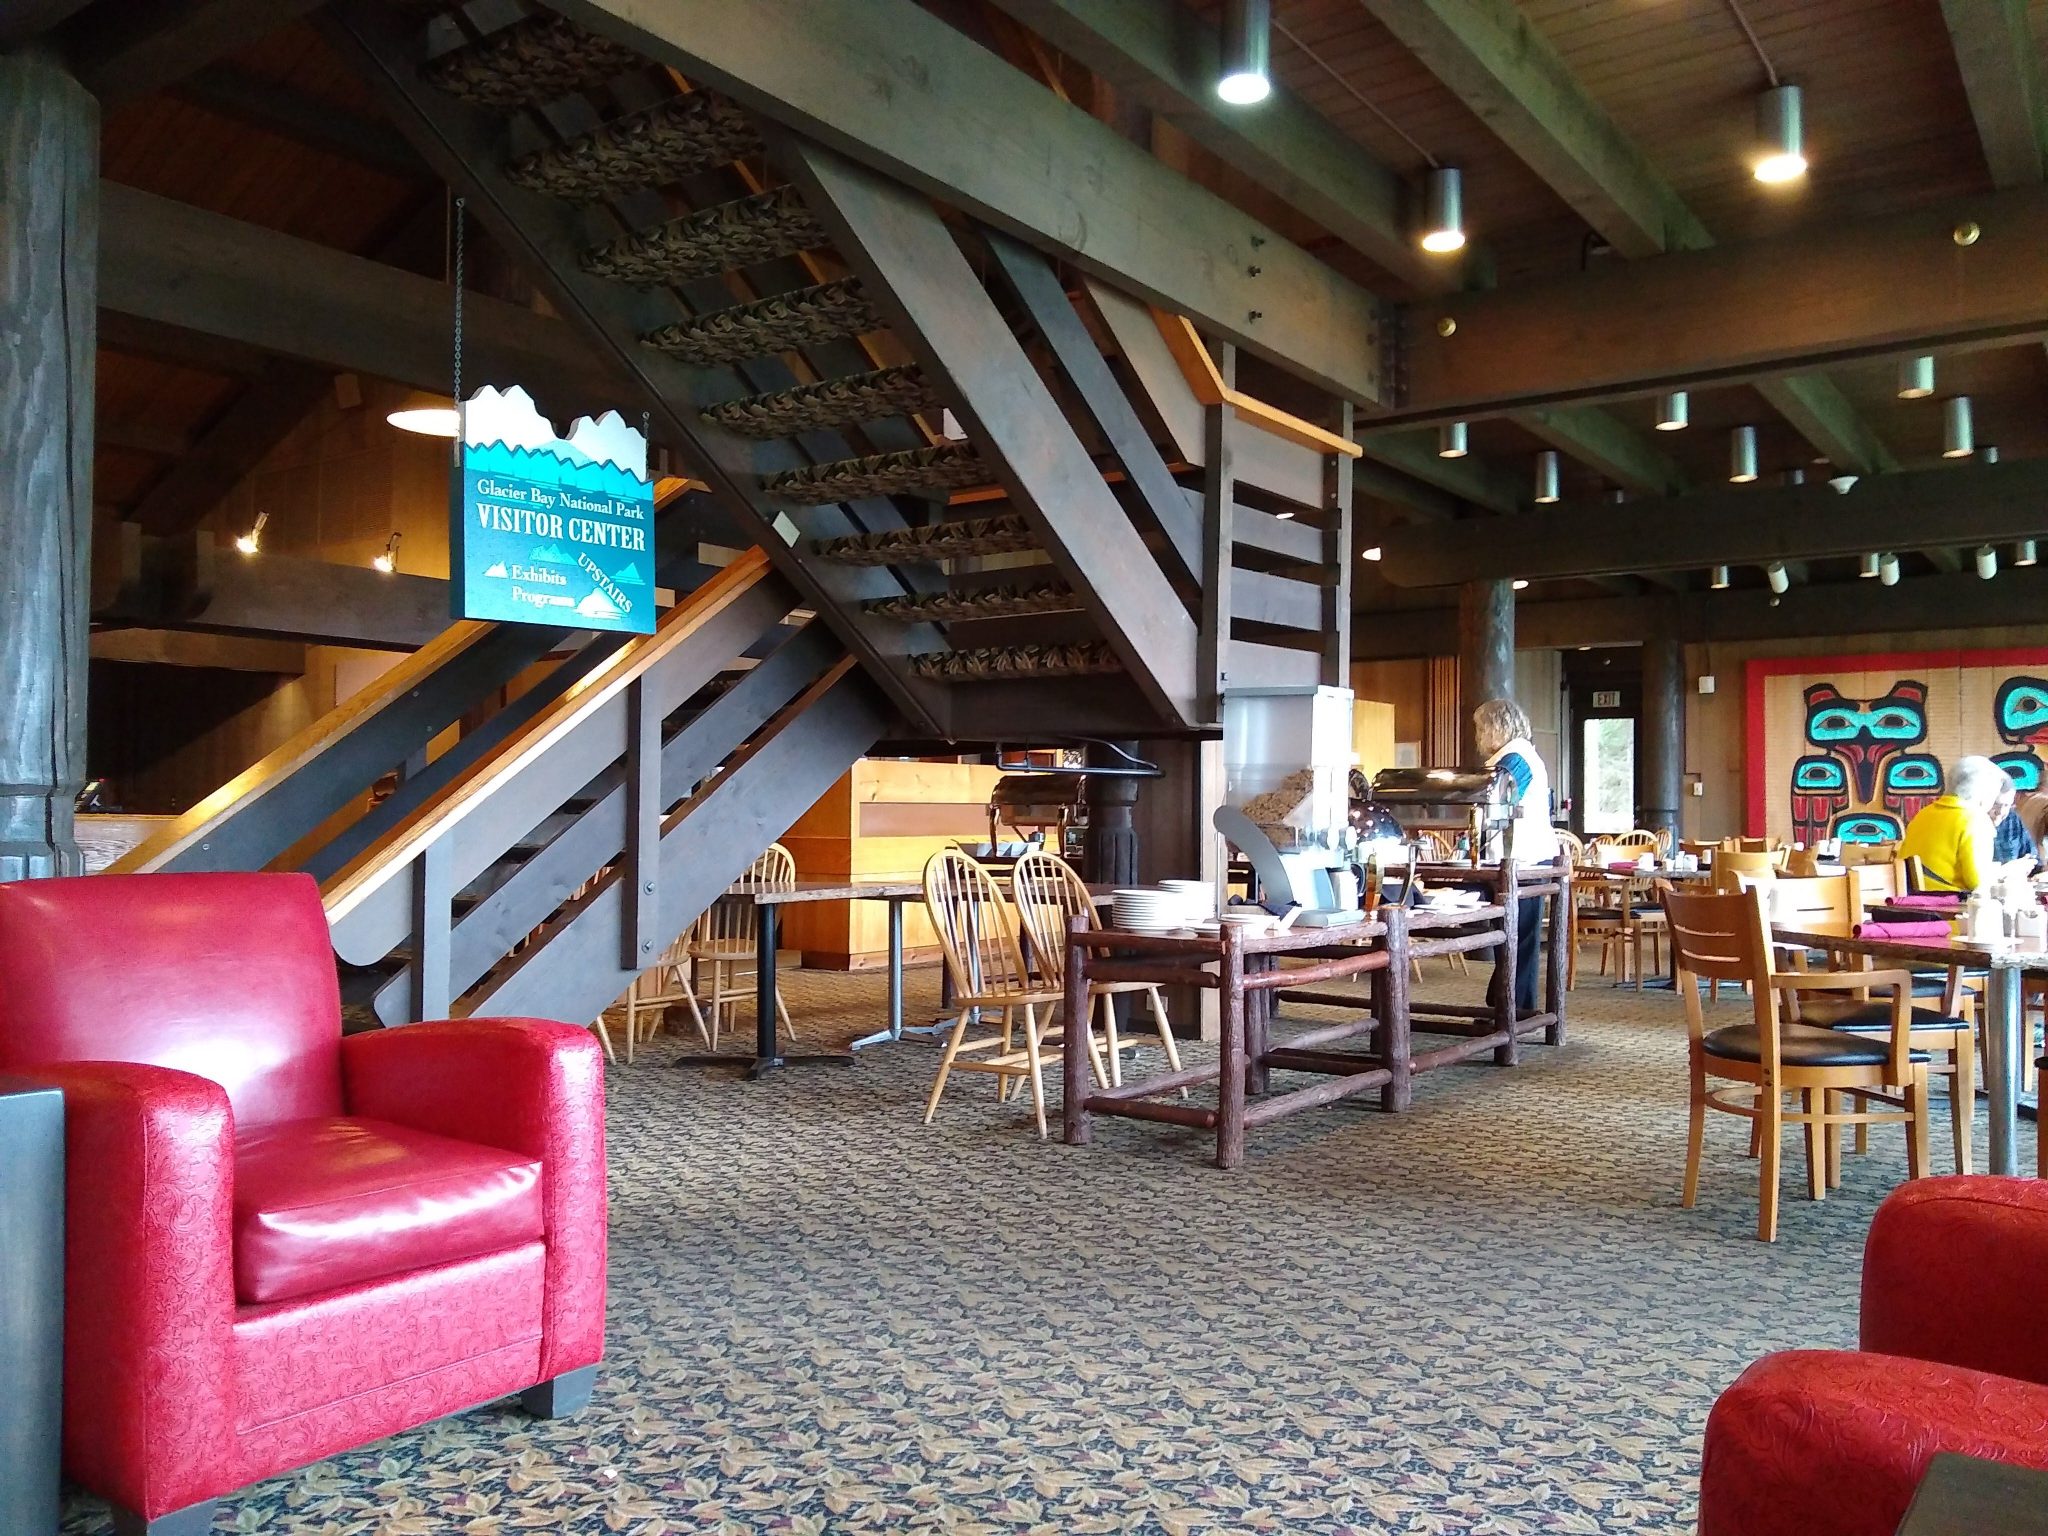 A lodge lobby has a staircase in the middle and red lounge chairs around. There is also a restaurant, with wooden tables and chairs and Tlingit art on the walls. The roof is made of wood and there is a patterned carpet